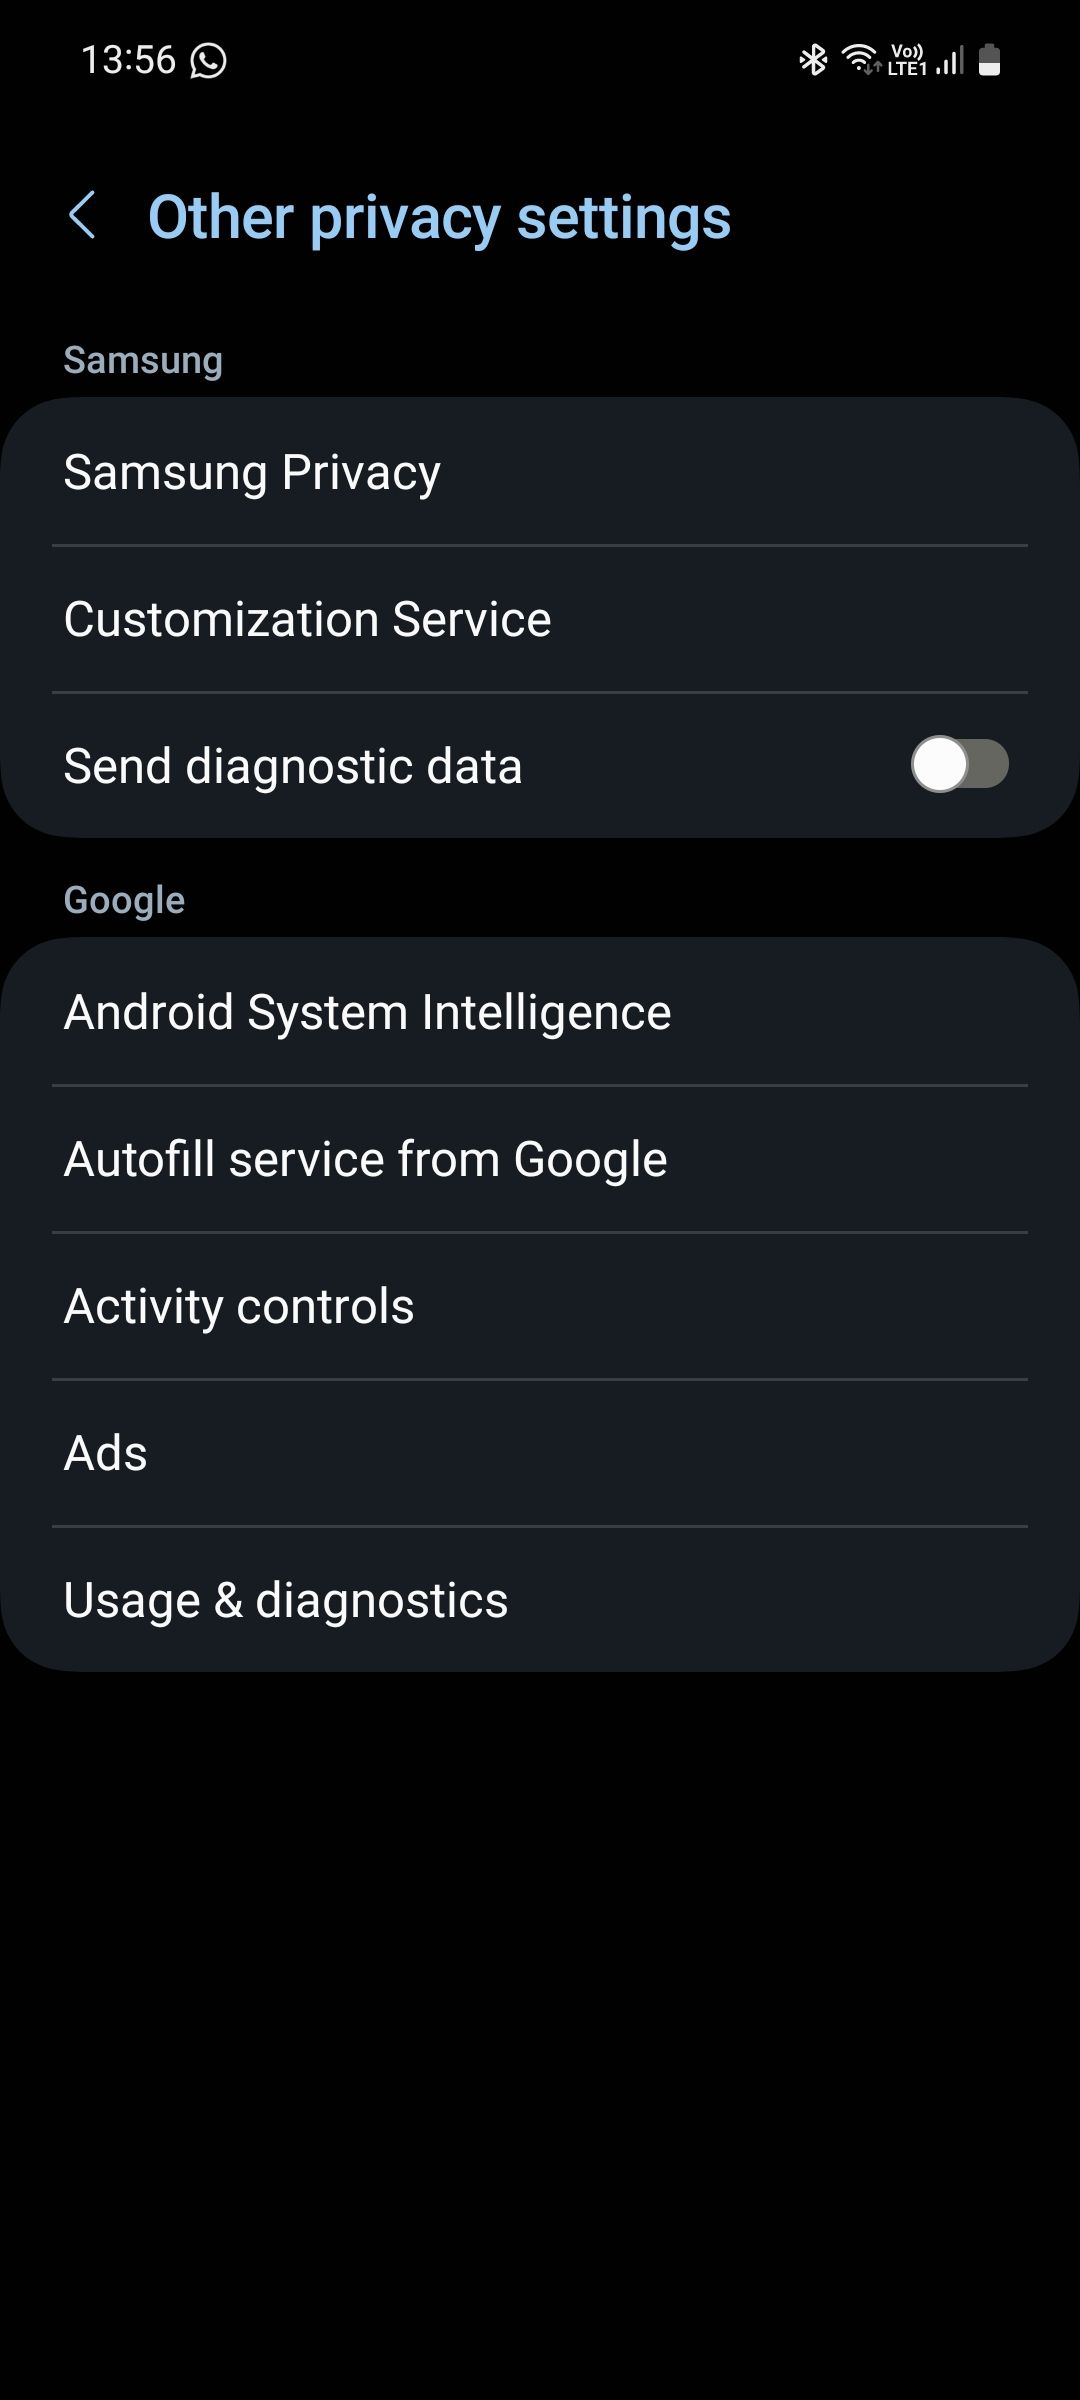 Samsung Other privacy settings menu